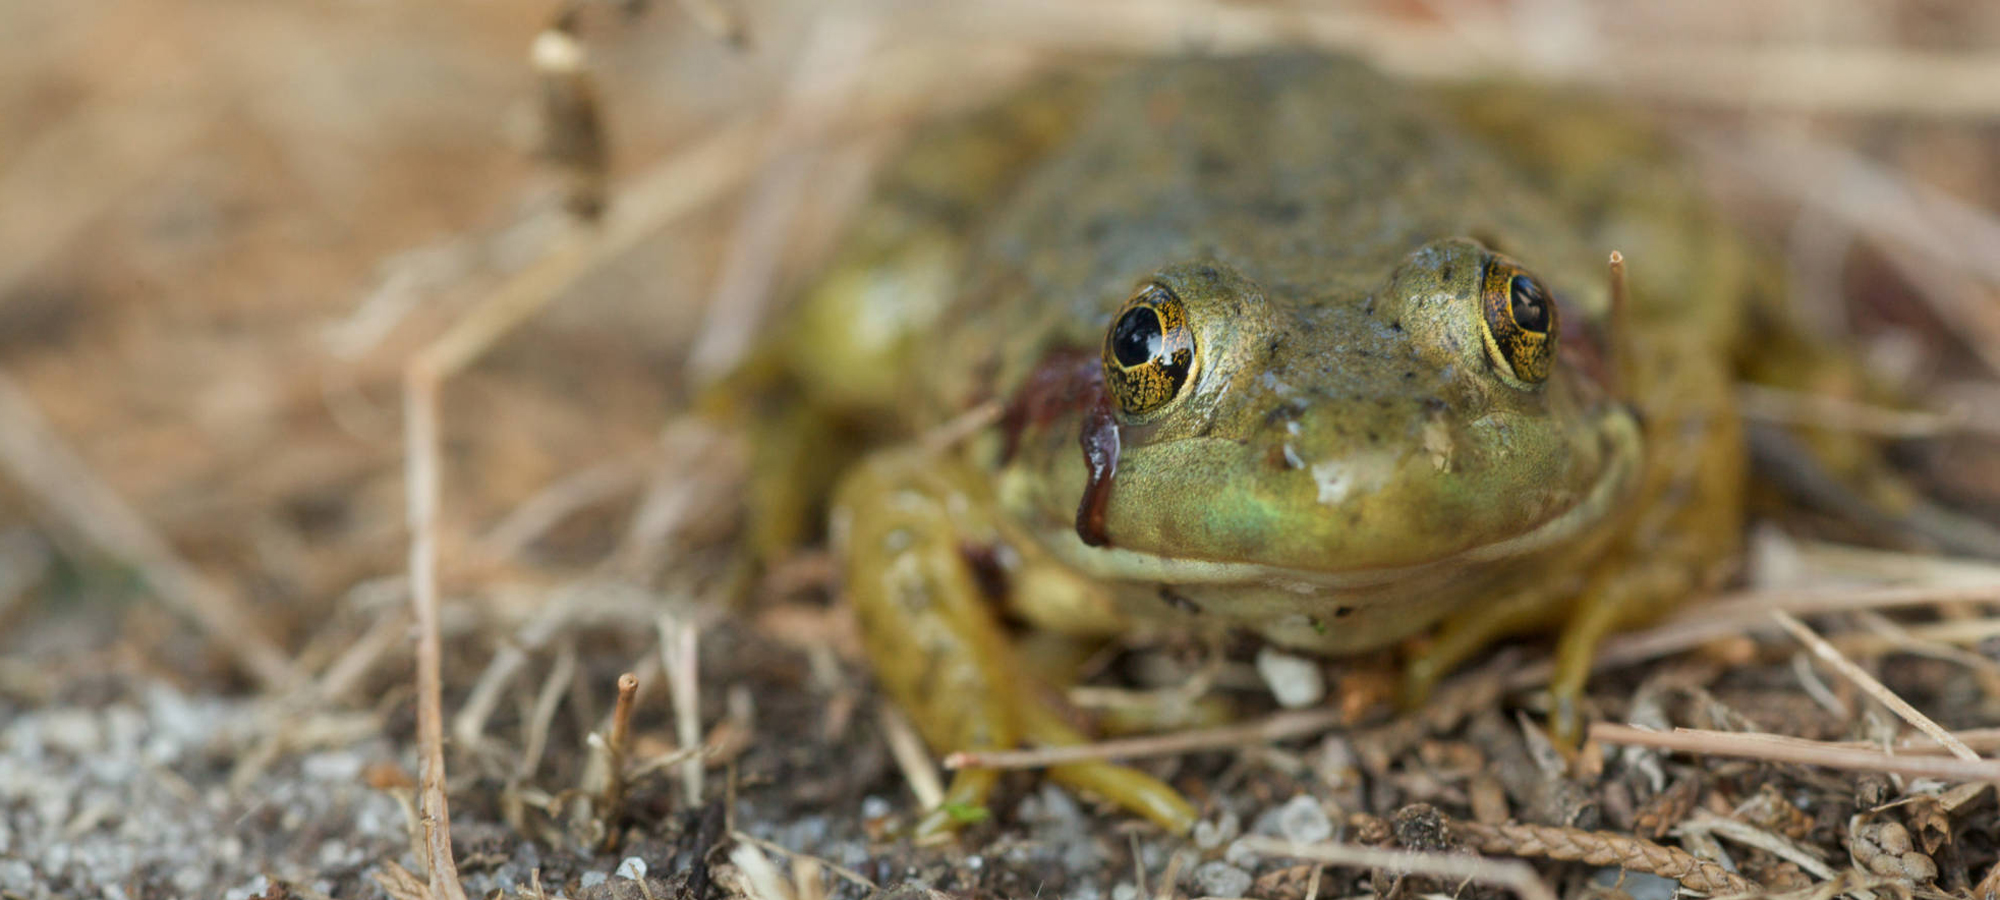 A Beginner's Guide to Gigging Frogs